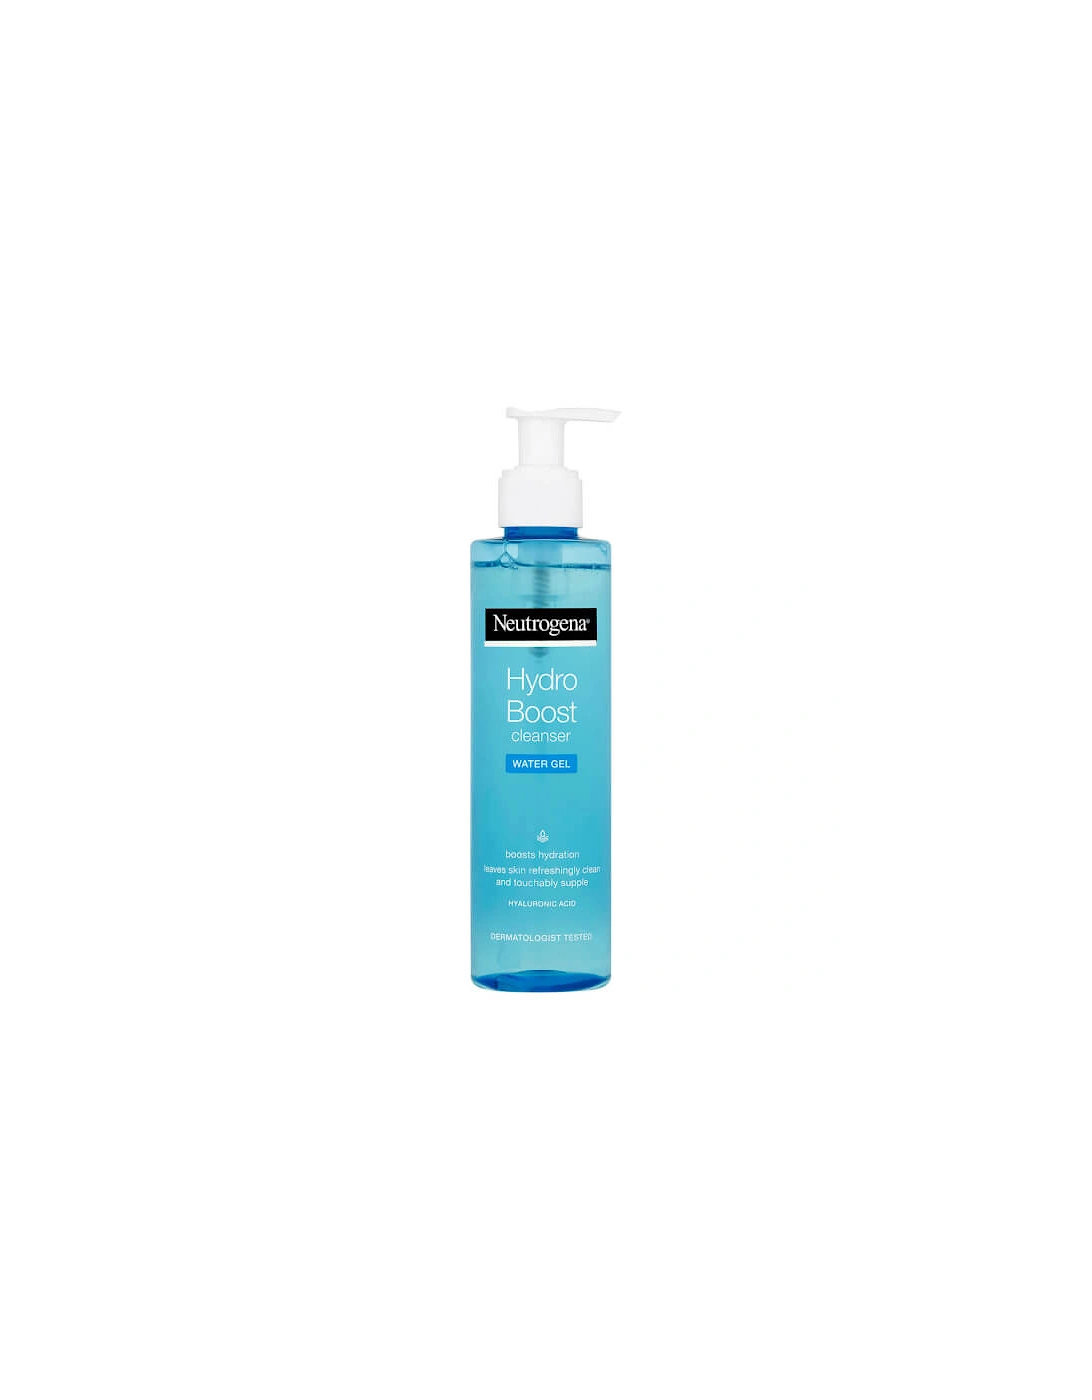 Hydro Boost Water Gel Facial Cleanser for Dry or Dehydrated Skin 200ml - Neutrogena, 2 of 1